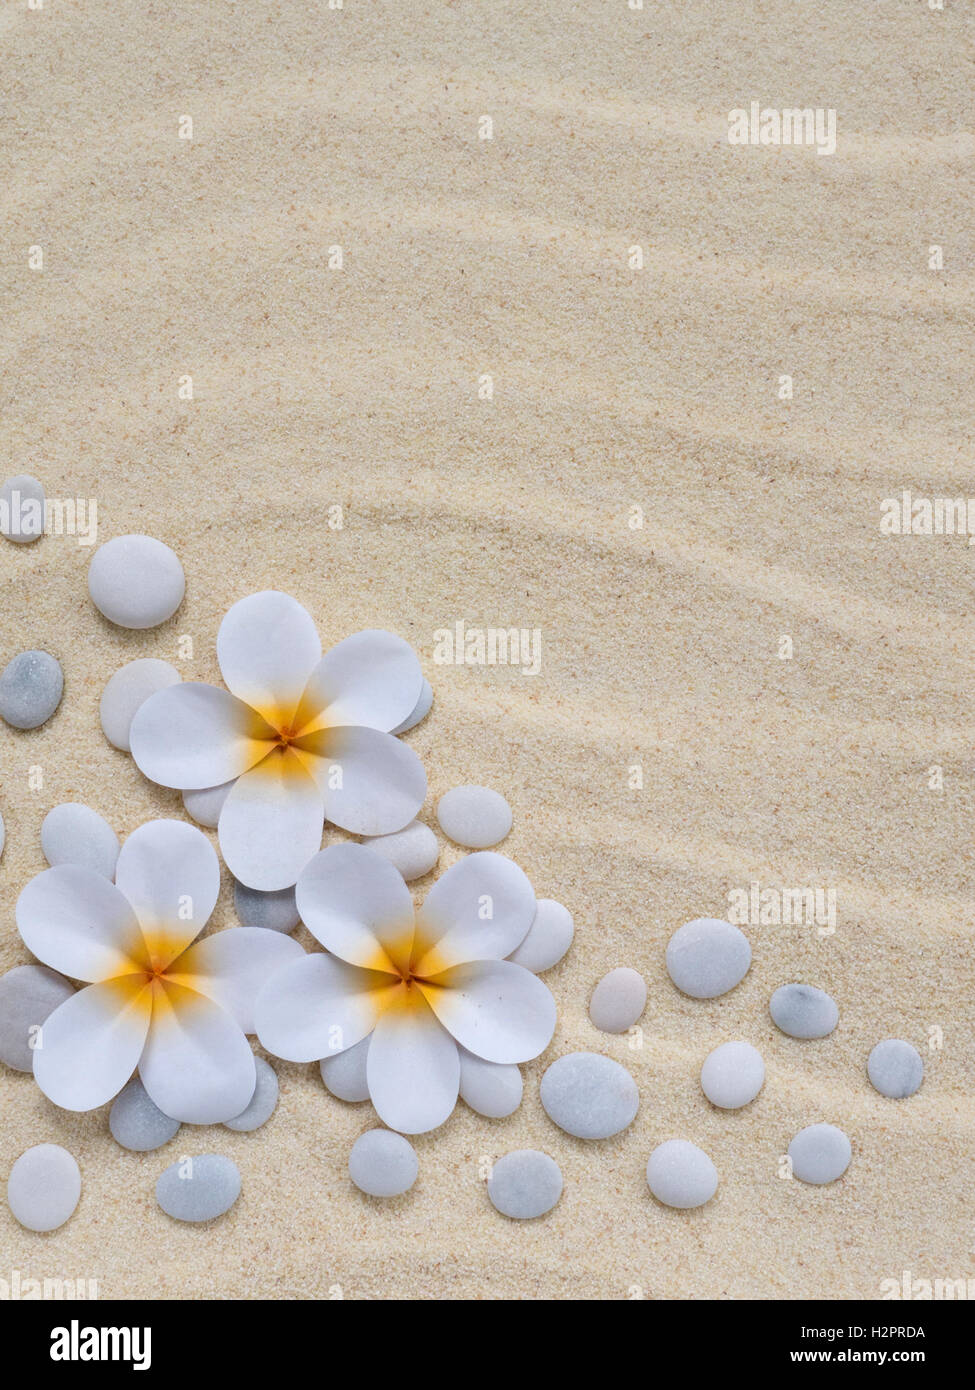 Tiare flowers and stones on the sand Stock Photo